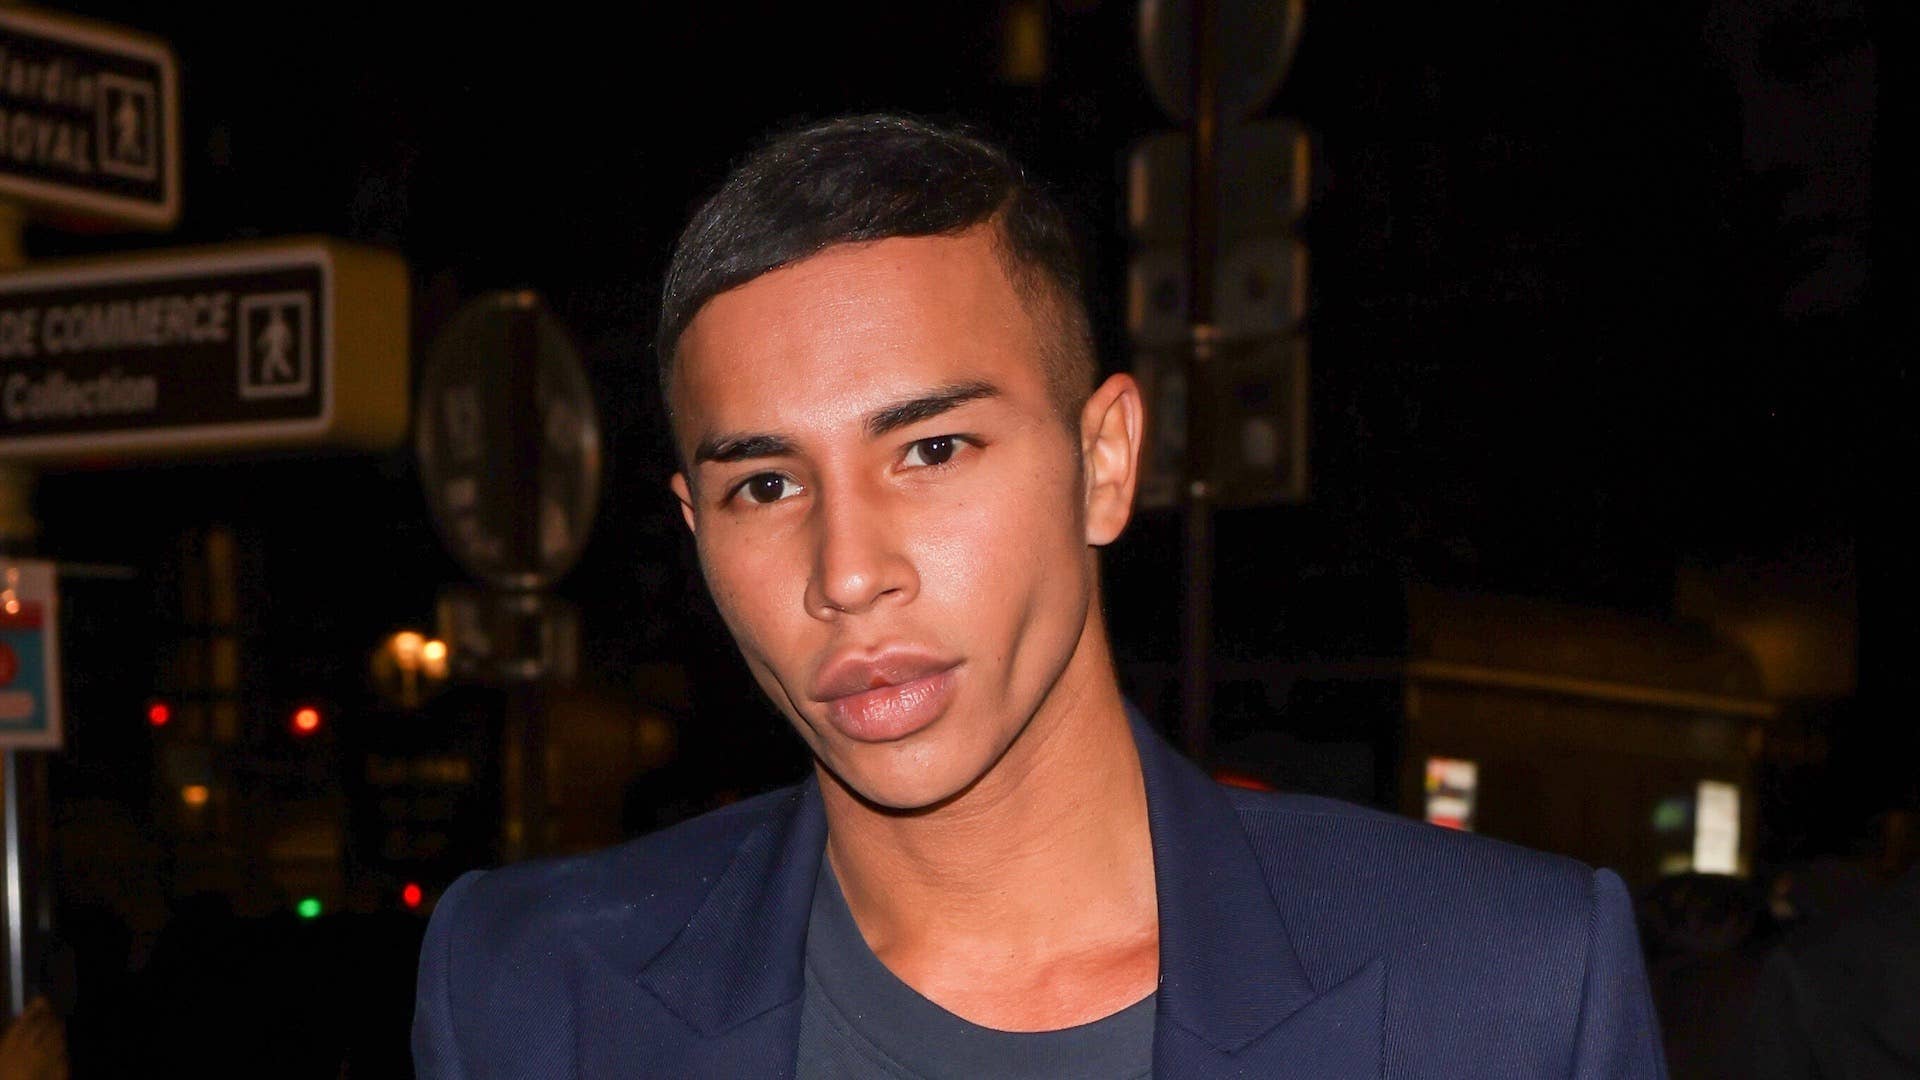 Fashion designer Olivier Rousteing attends the Isabel Marant show.